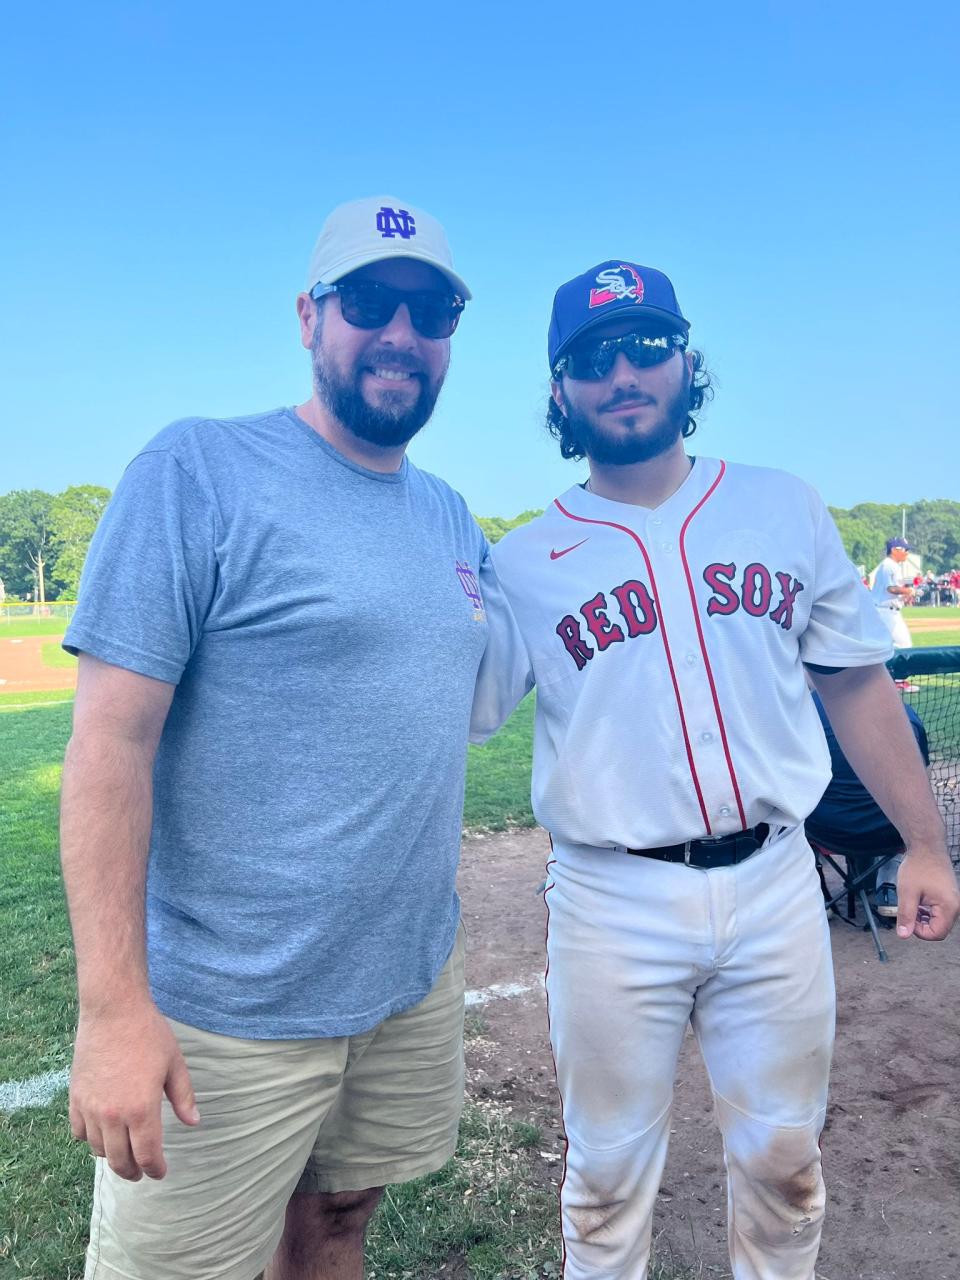 Clarkstown North baseball coach Joe Stefania (left) poses for a photo with Will King (right) after a game at the Cape Cod Summer Baseball League earlier this month.